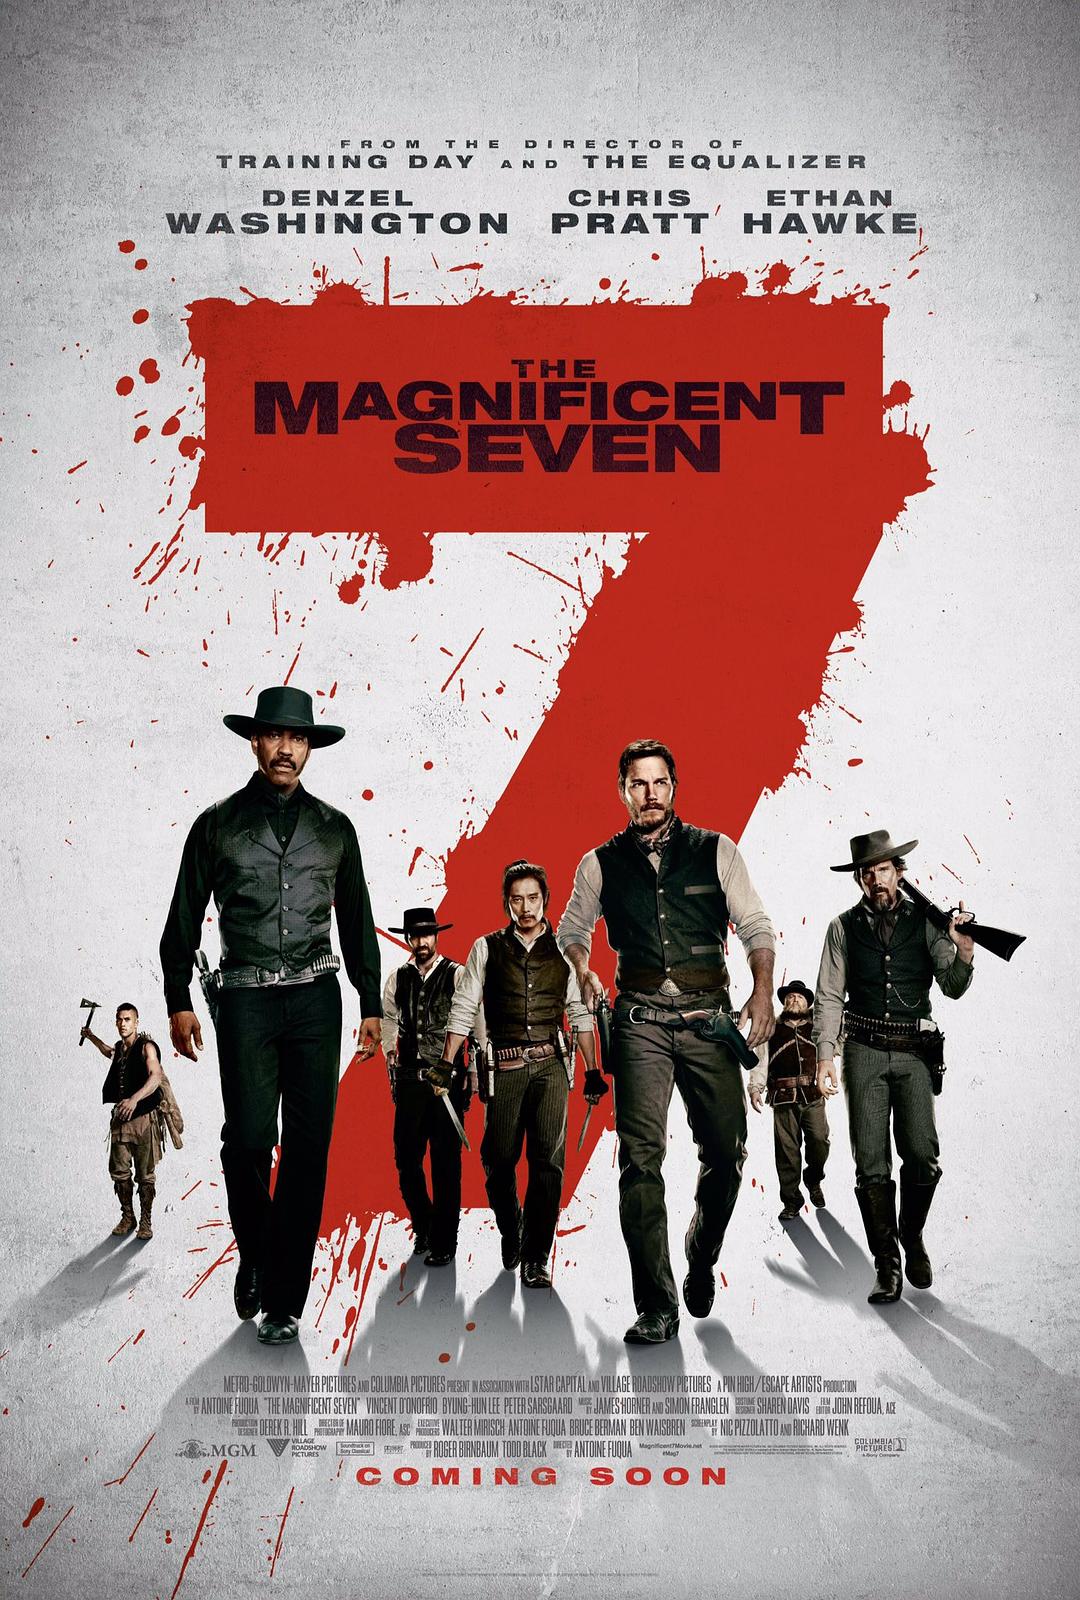 /־ The.Magnificent.Seven.2016.1080p.BluRay.x264.DTS-HD.MA.7.1-FGT 10.95-1.png